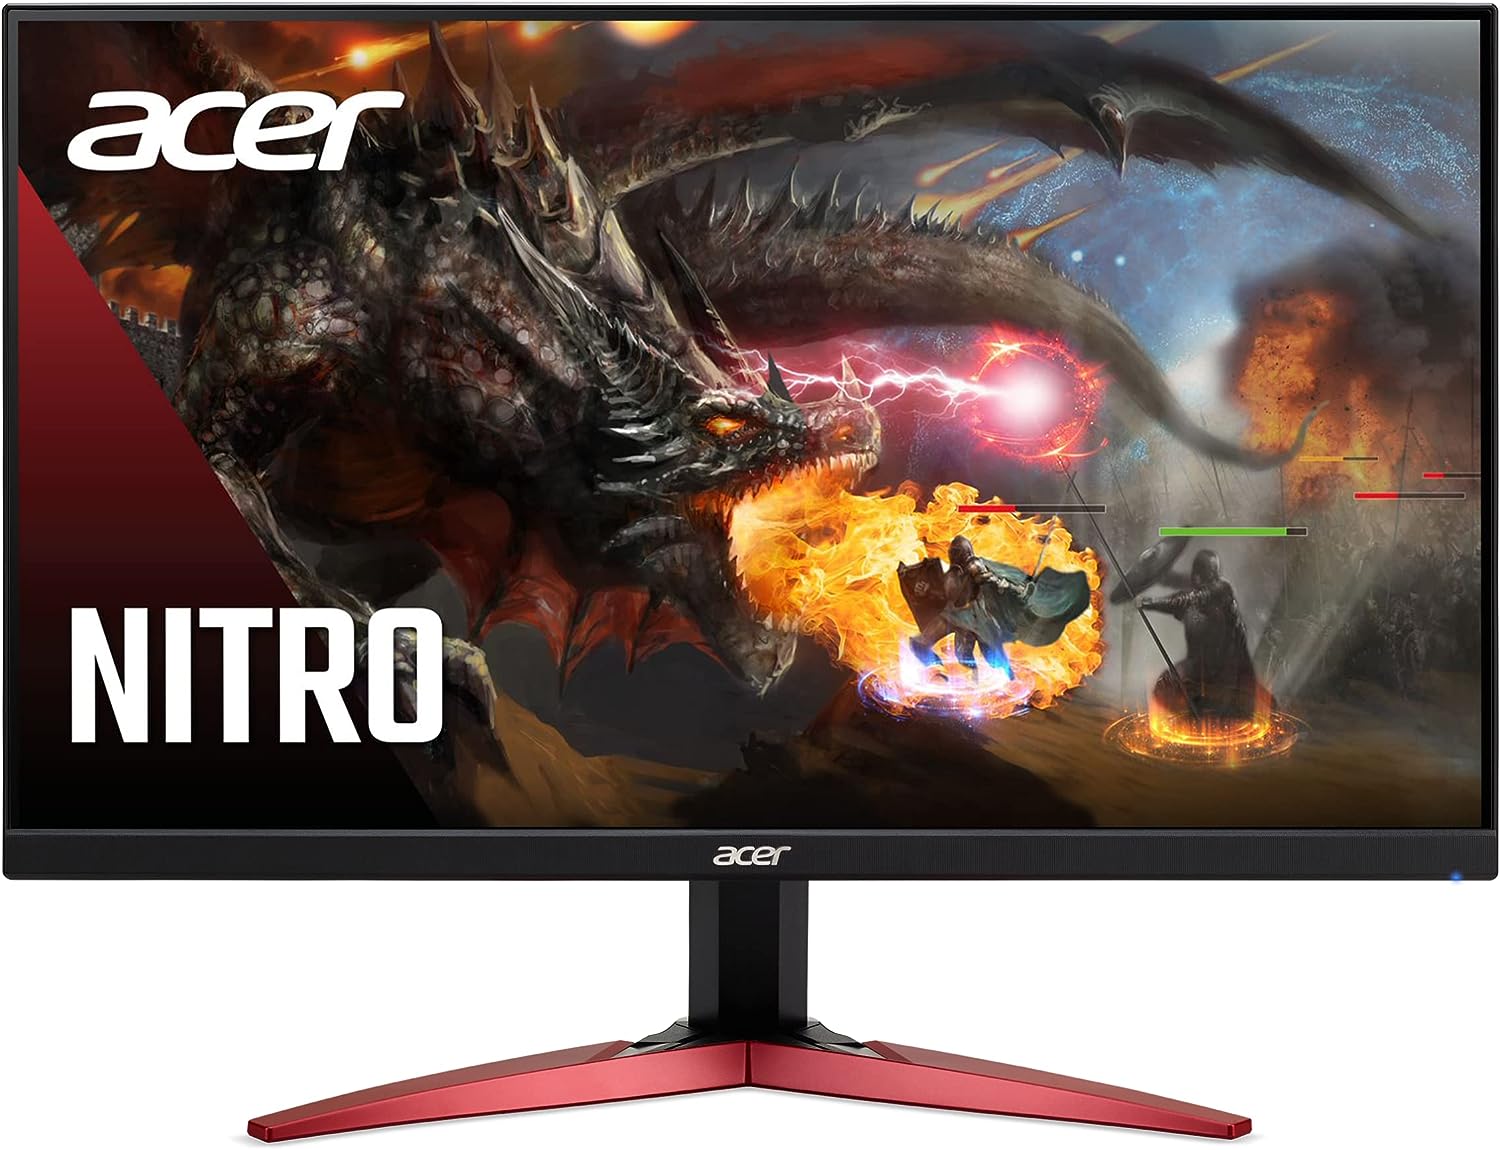 Top 5 Best Gaming Monitors: A Gamer's Guide